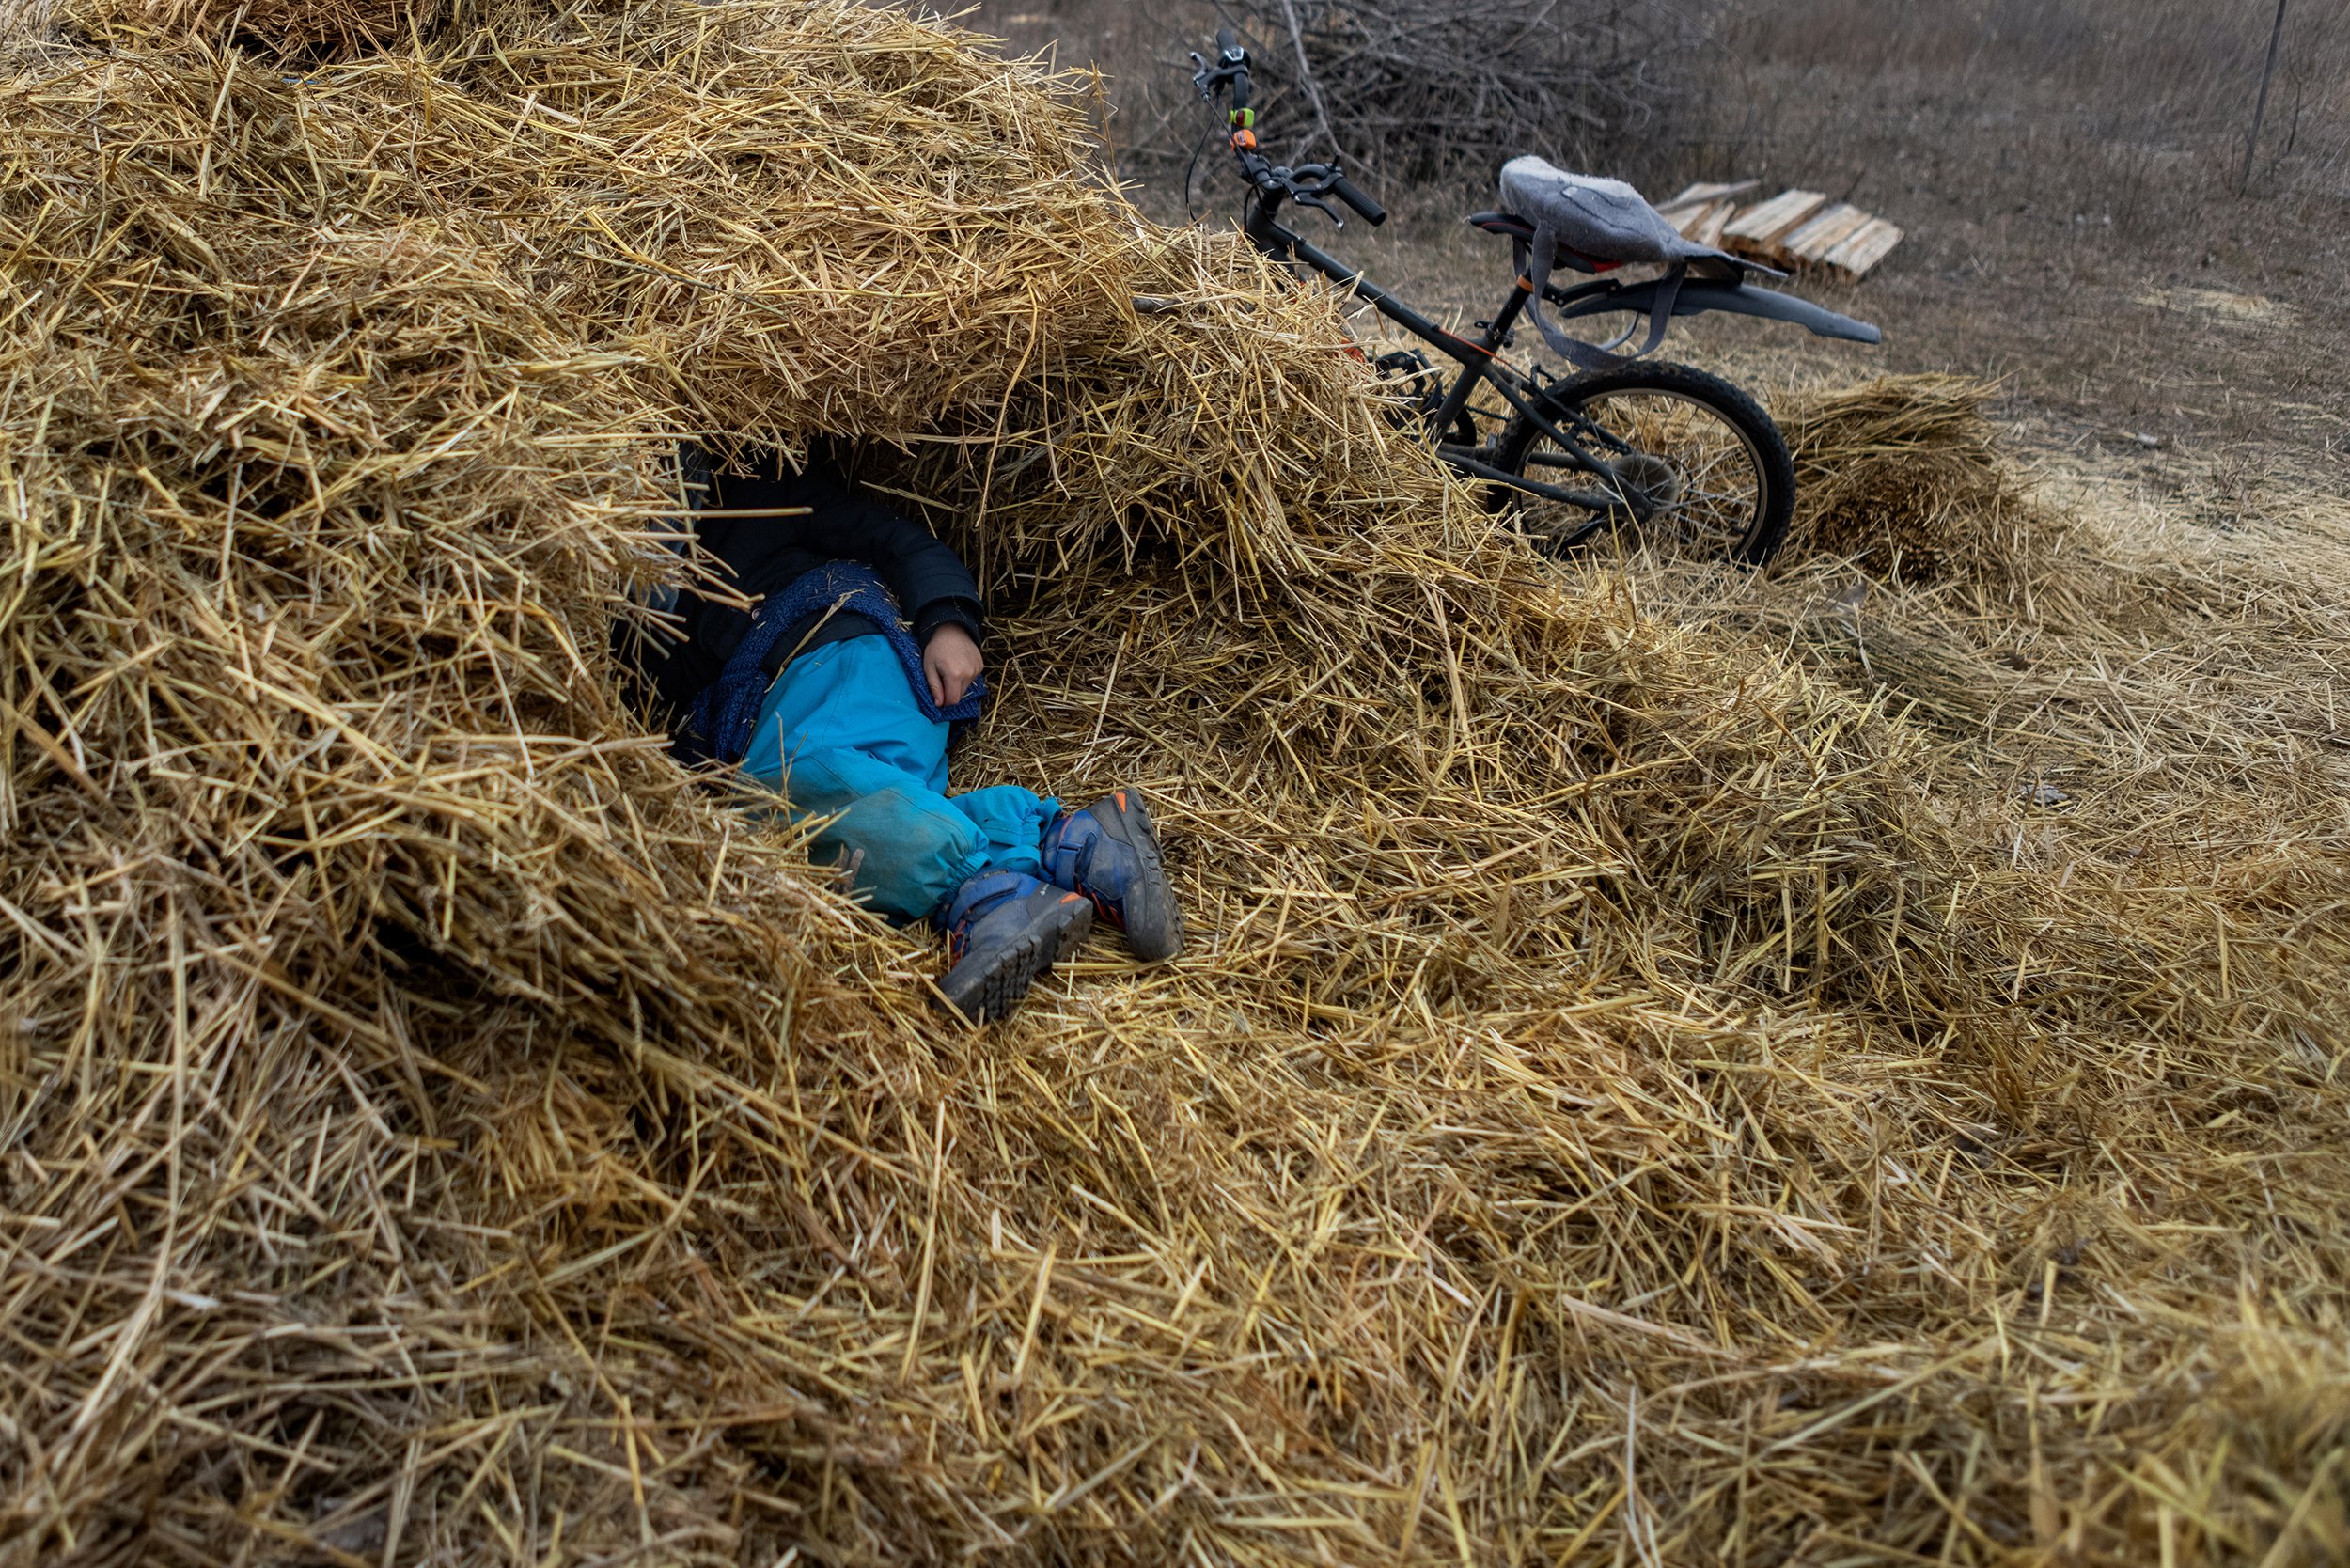  Little boy playing in the straw on the Eco-meadow in Nyim, on February 19, 2022.  